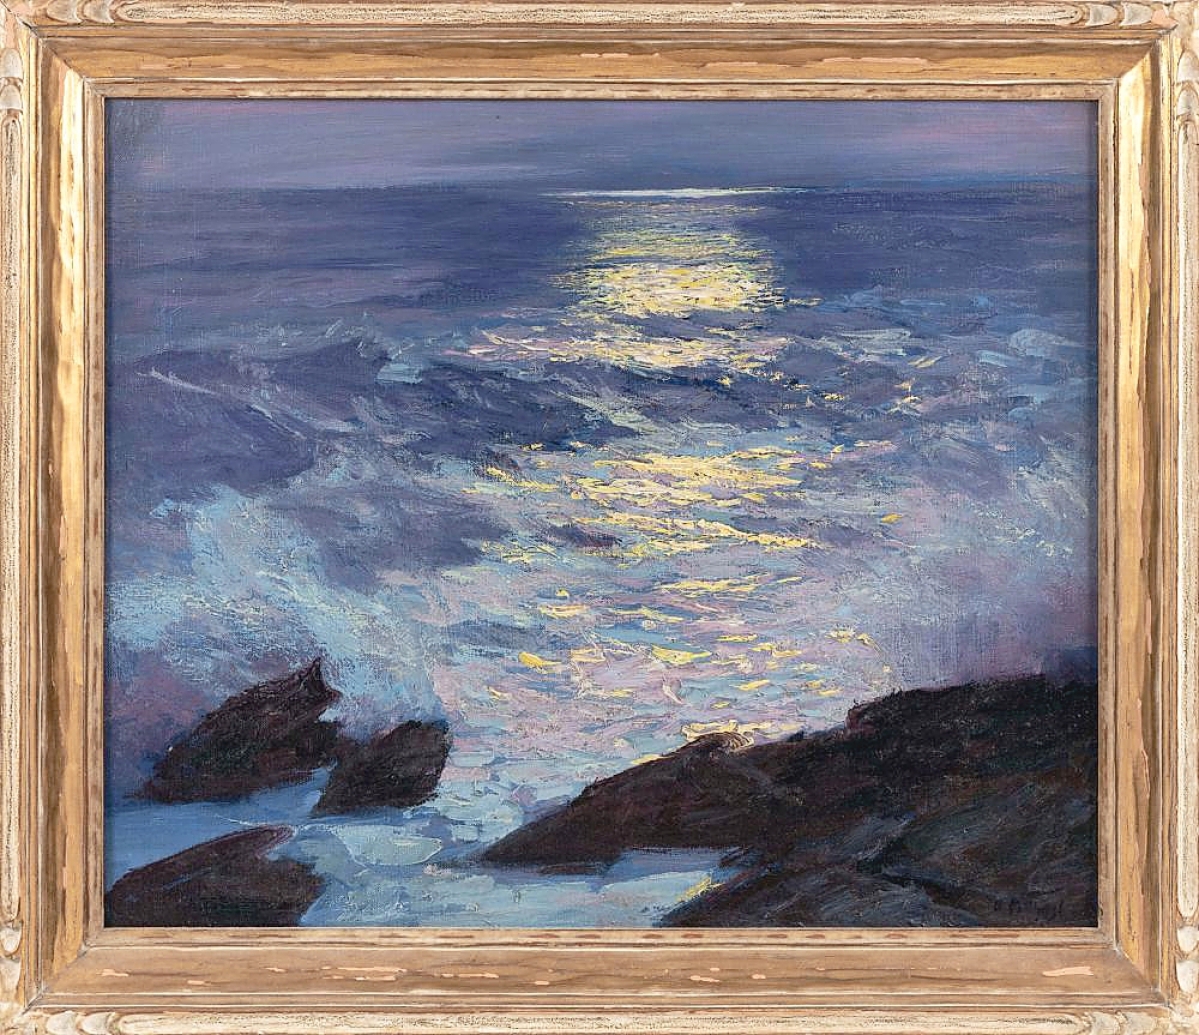 Three phone bidders competed against online interest in Edward Henry Potthast’s “Moonlit Seascape,” which sold to an American phone bidder for $162,500. Done in oil on canvas, it measured 24½ by 28½ inches in the frame and was the top price realized in the three days of sale ($20/30,000).